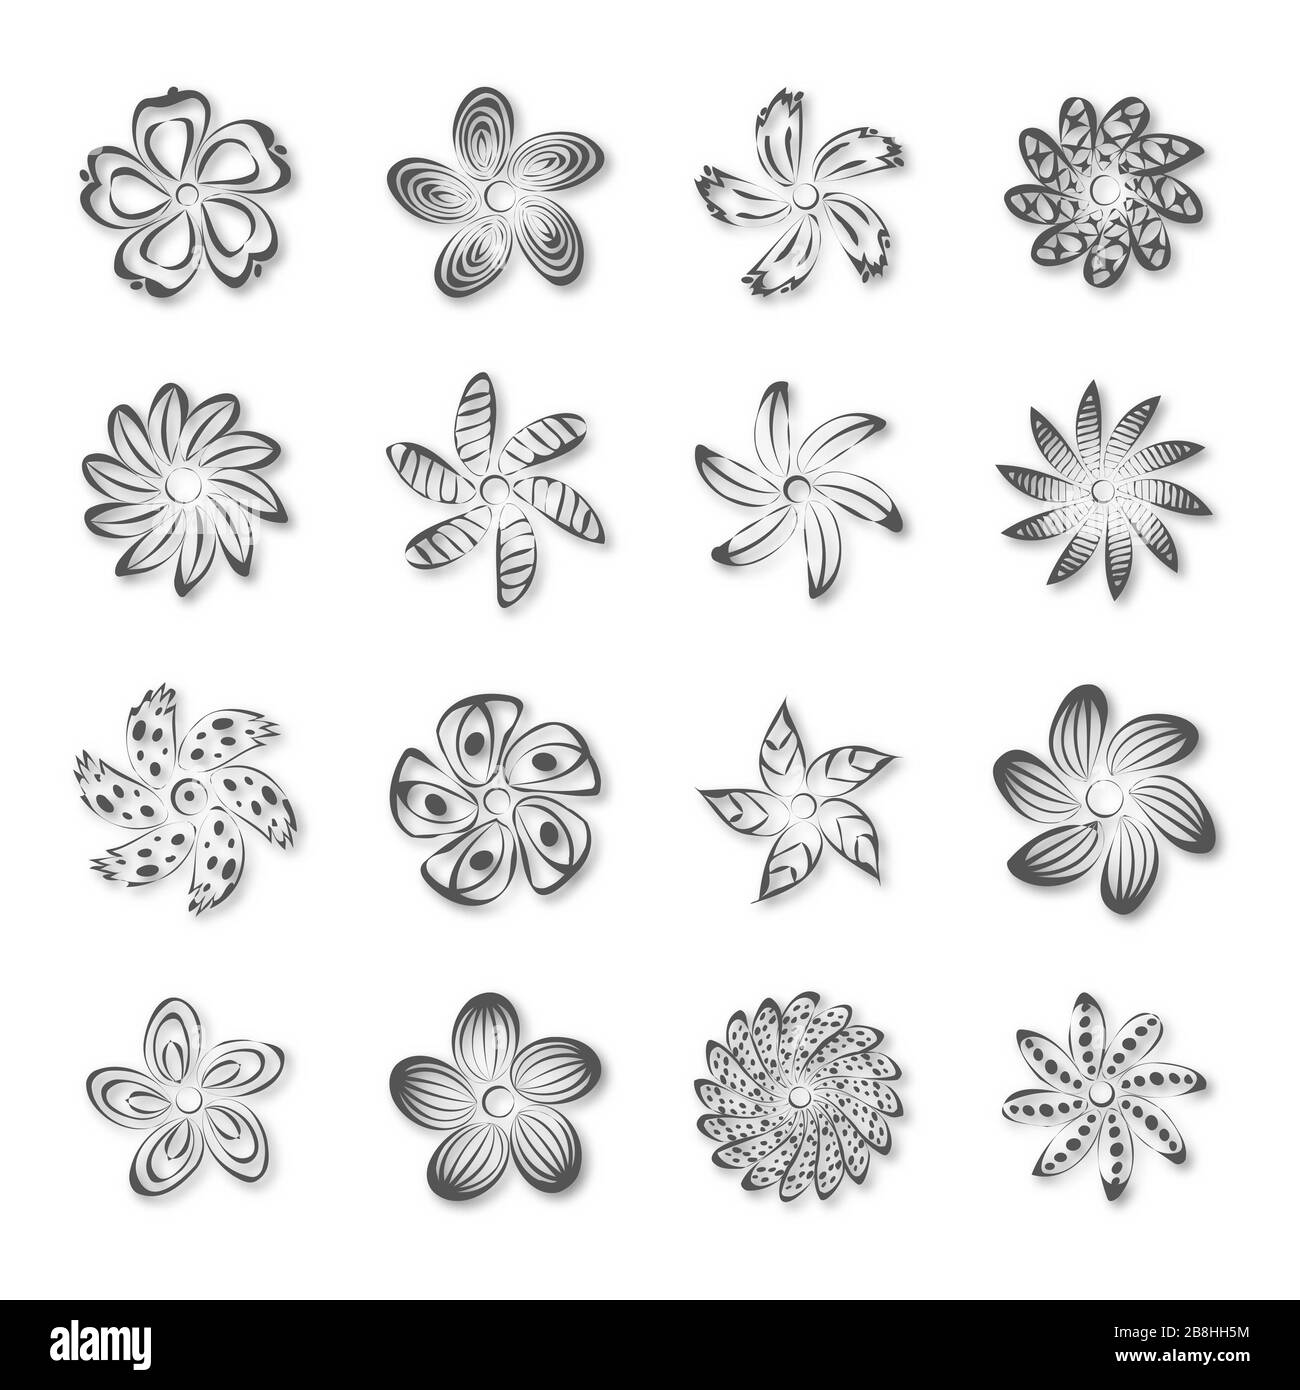 Set of various abstract flower buds isolated on white background, vector illustration. Stock Vector